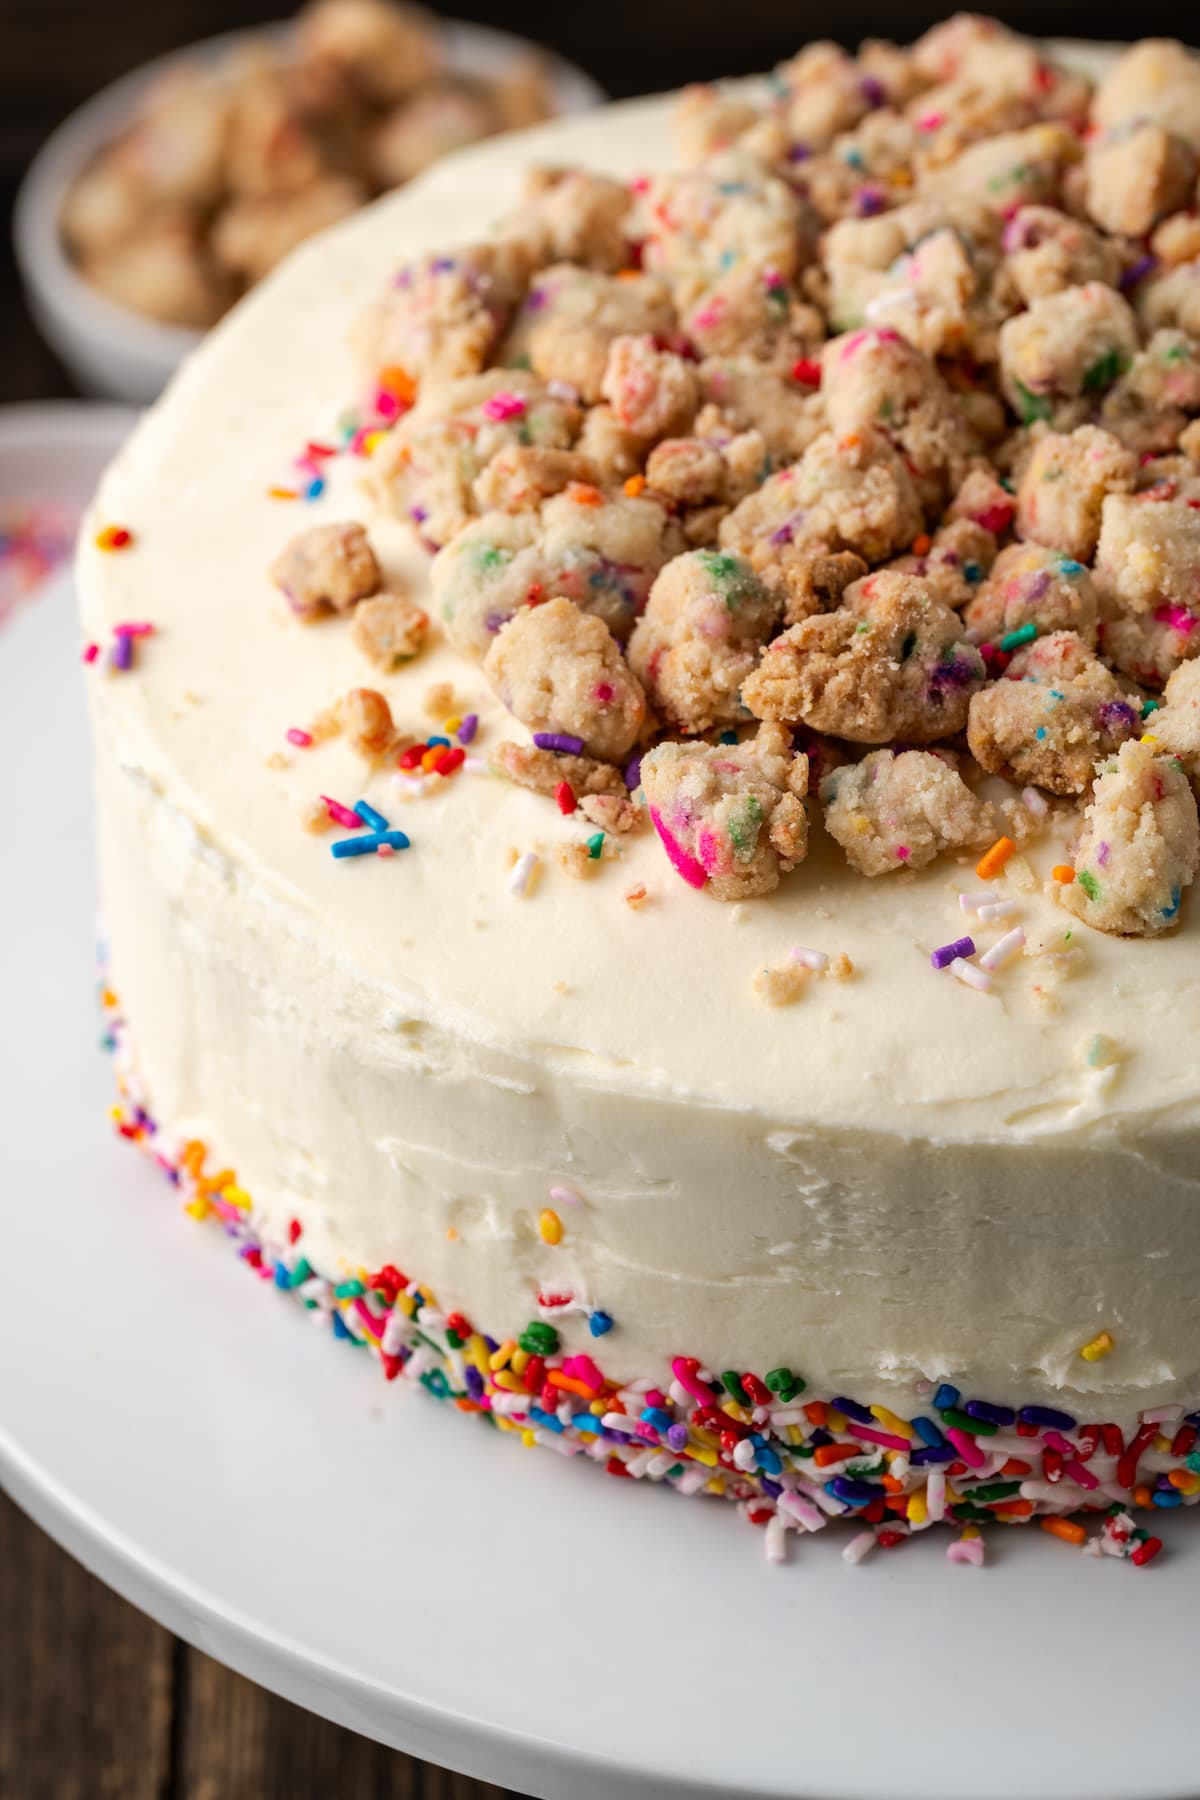 Frosted confetti cake decorated with sprinkles and a crumbled funfetti streusel topping.